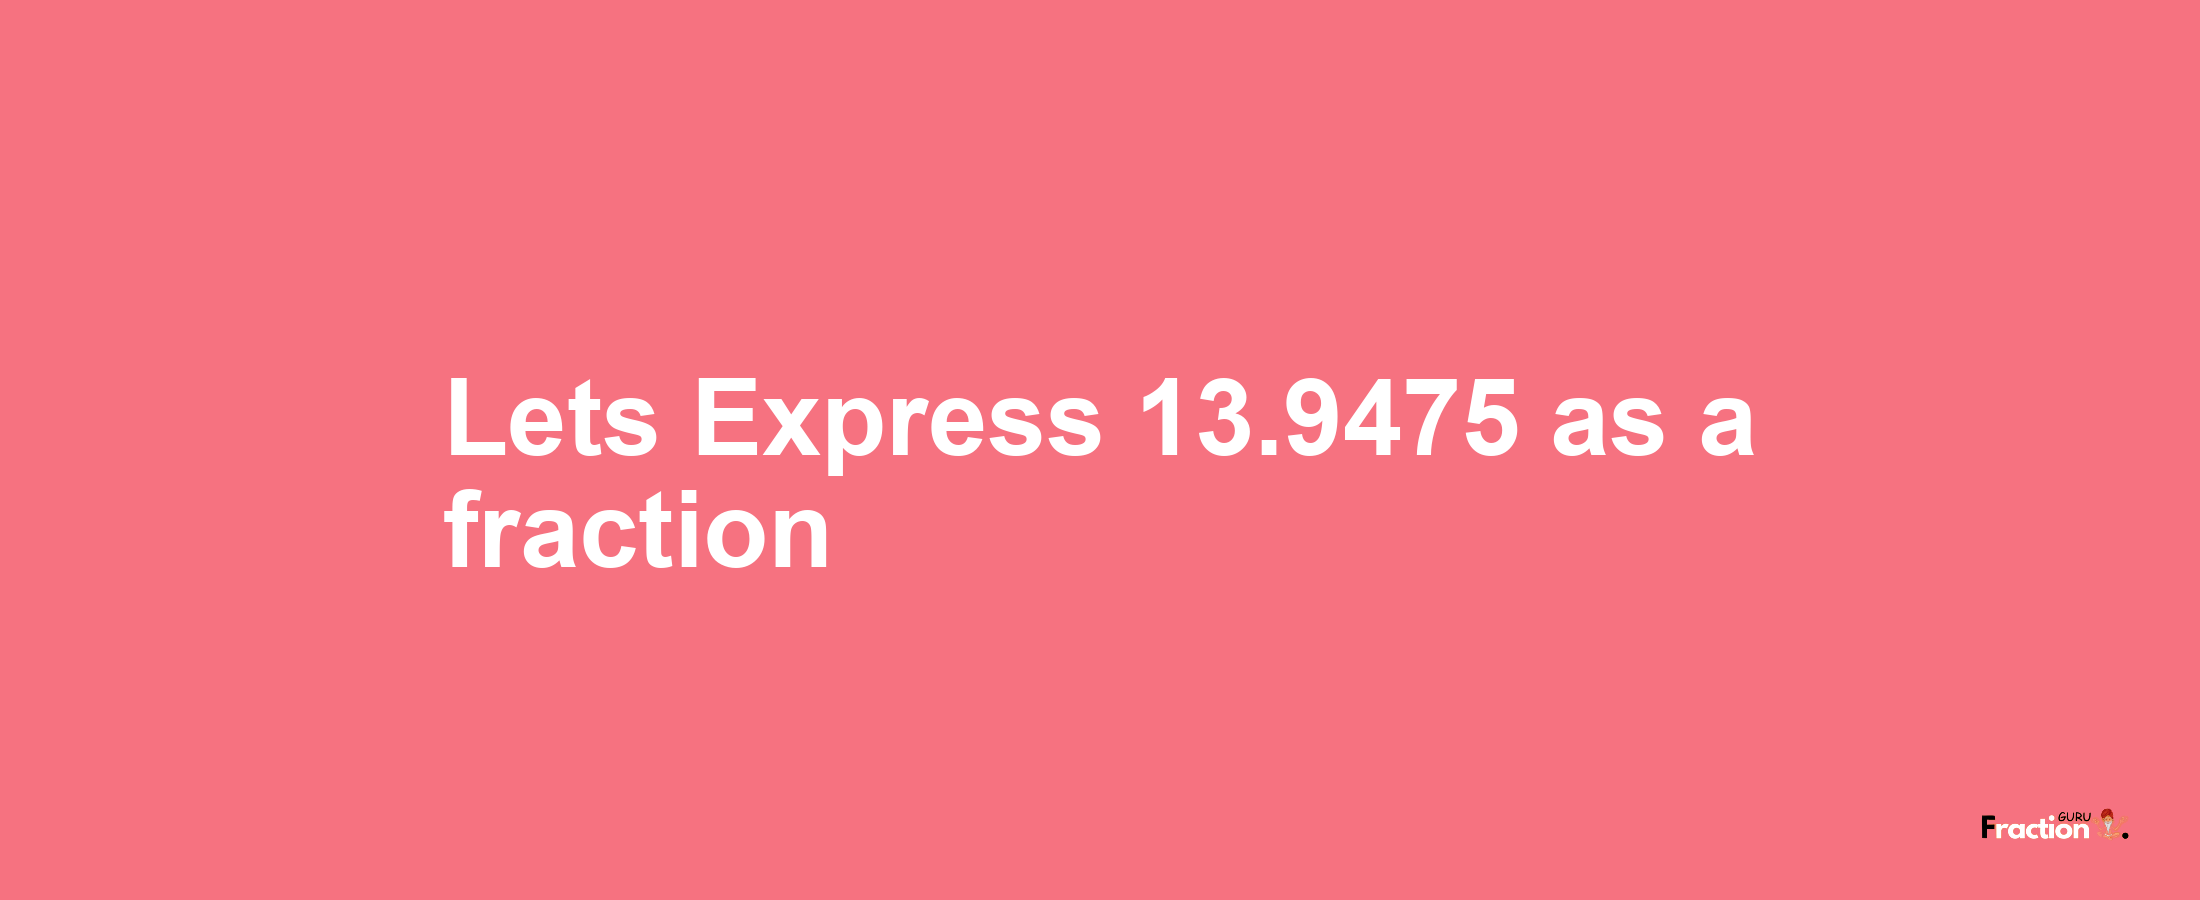 Lets Express 13.9475 as afraction